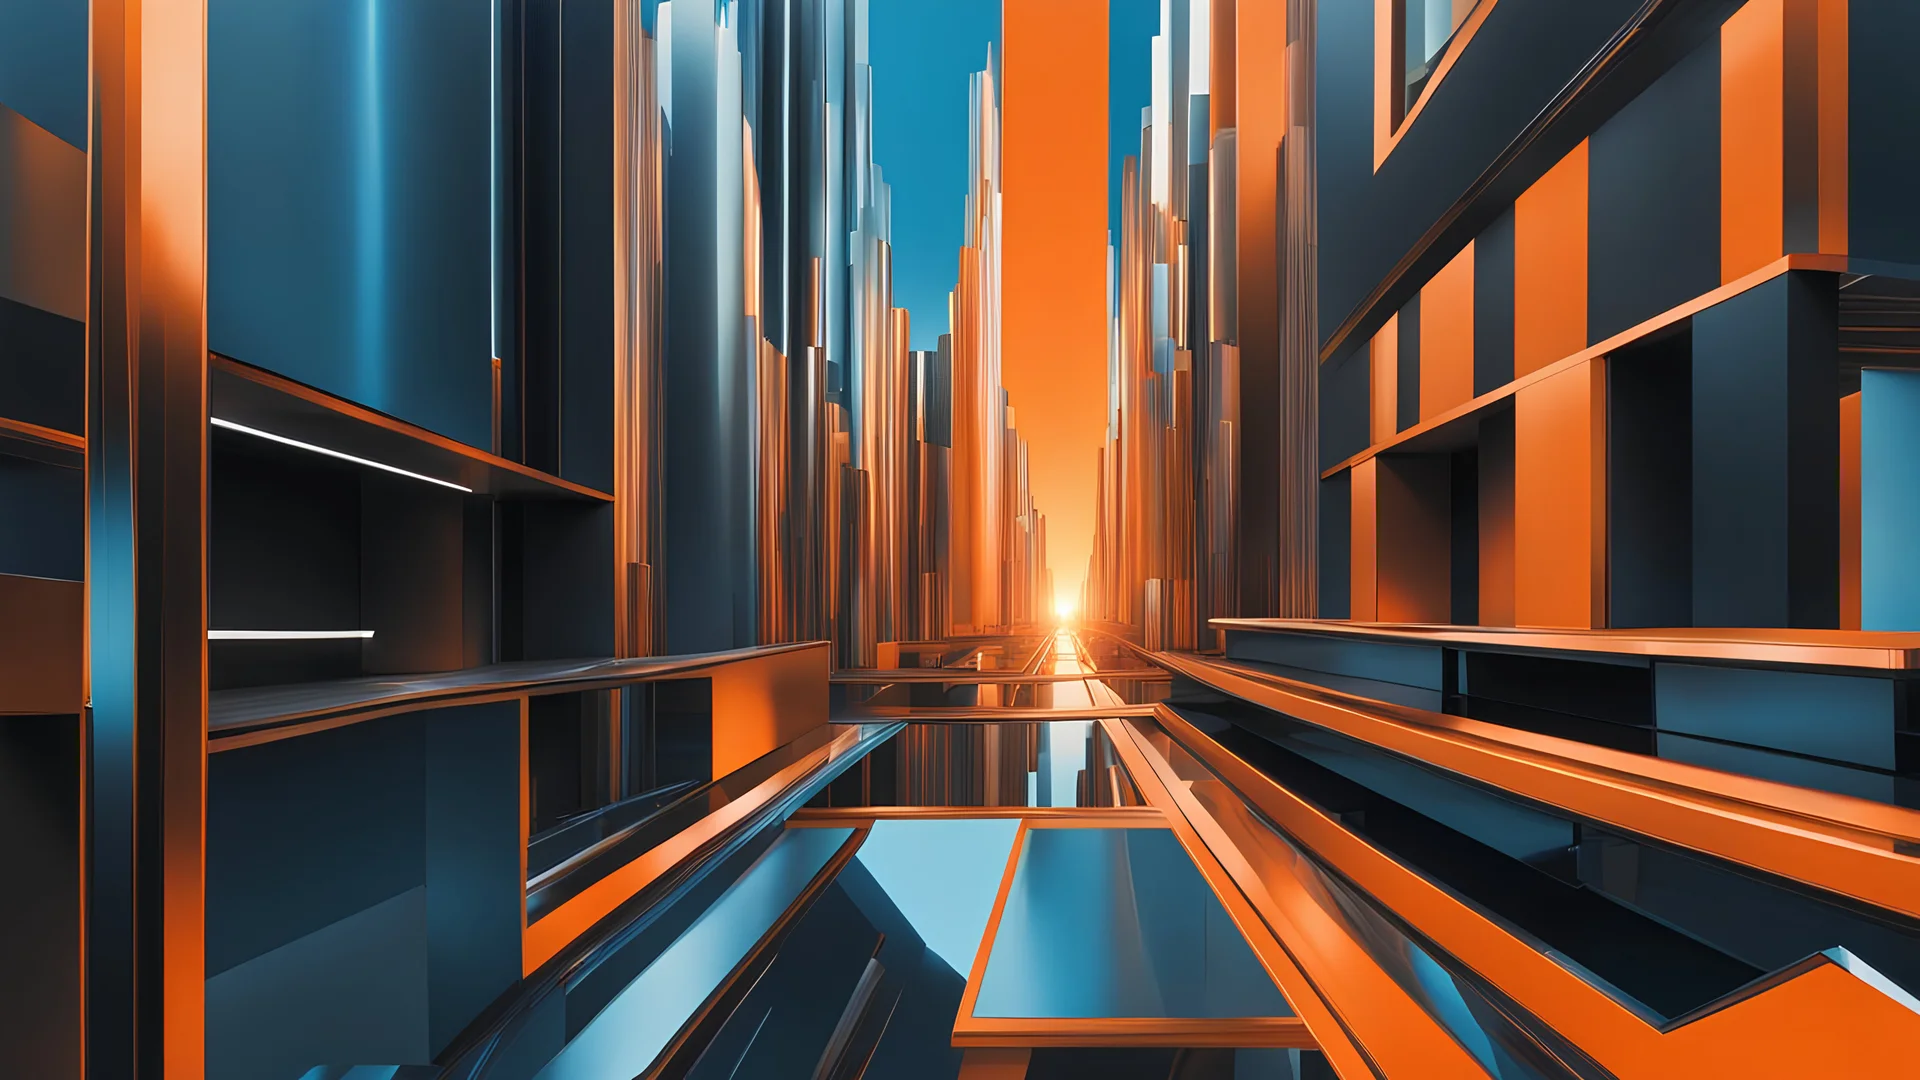 (hustle and bustle:55), (loop kick:20), (deconstruct:28), retro futurism style, urban canyon, centered, drone view, perfect loops, great verticals, great parallels, amazing reflections, excellent translucency, hard edge, colors of metallic orange and metallic steel blue